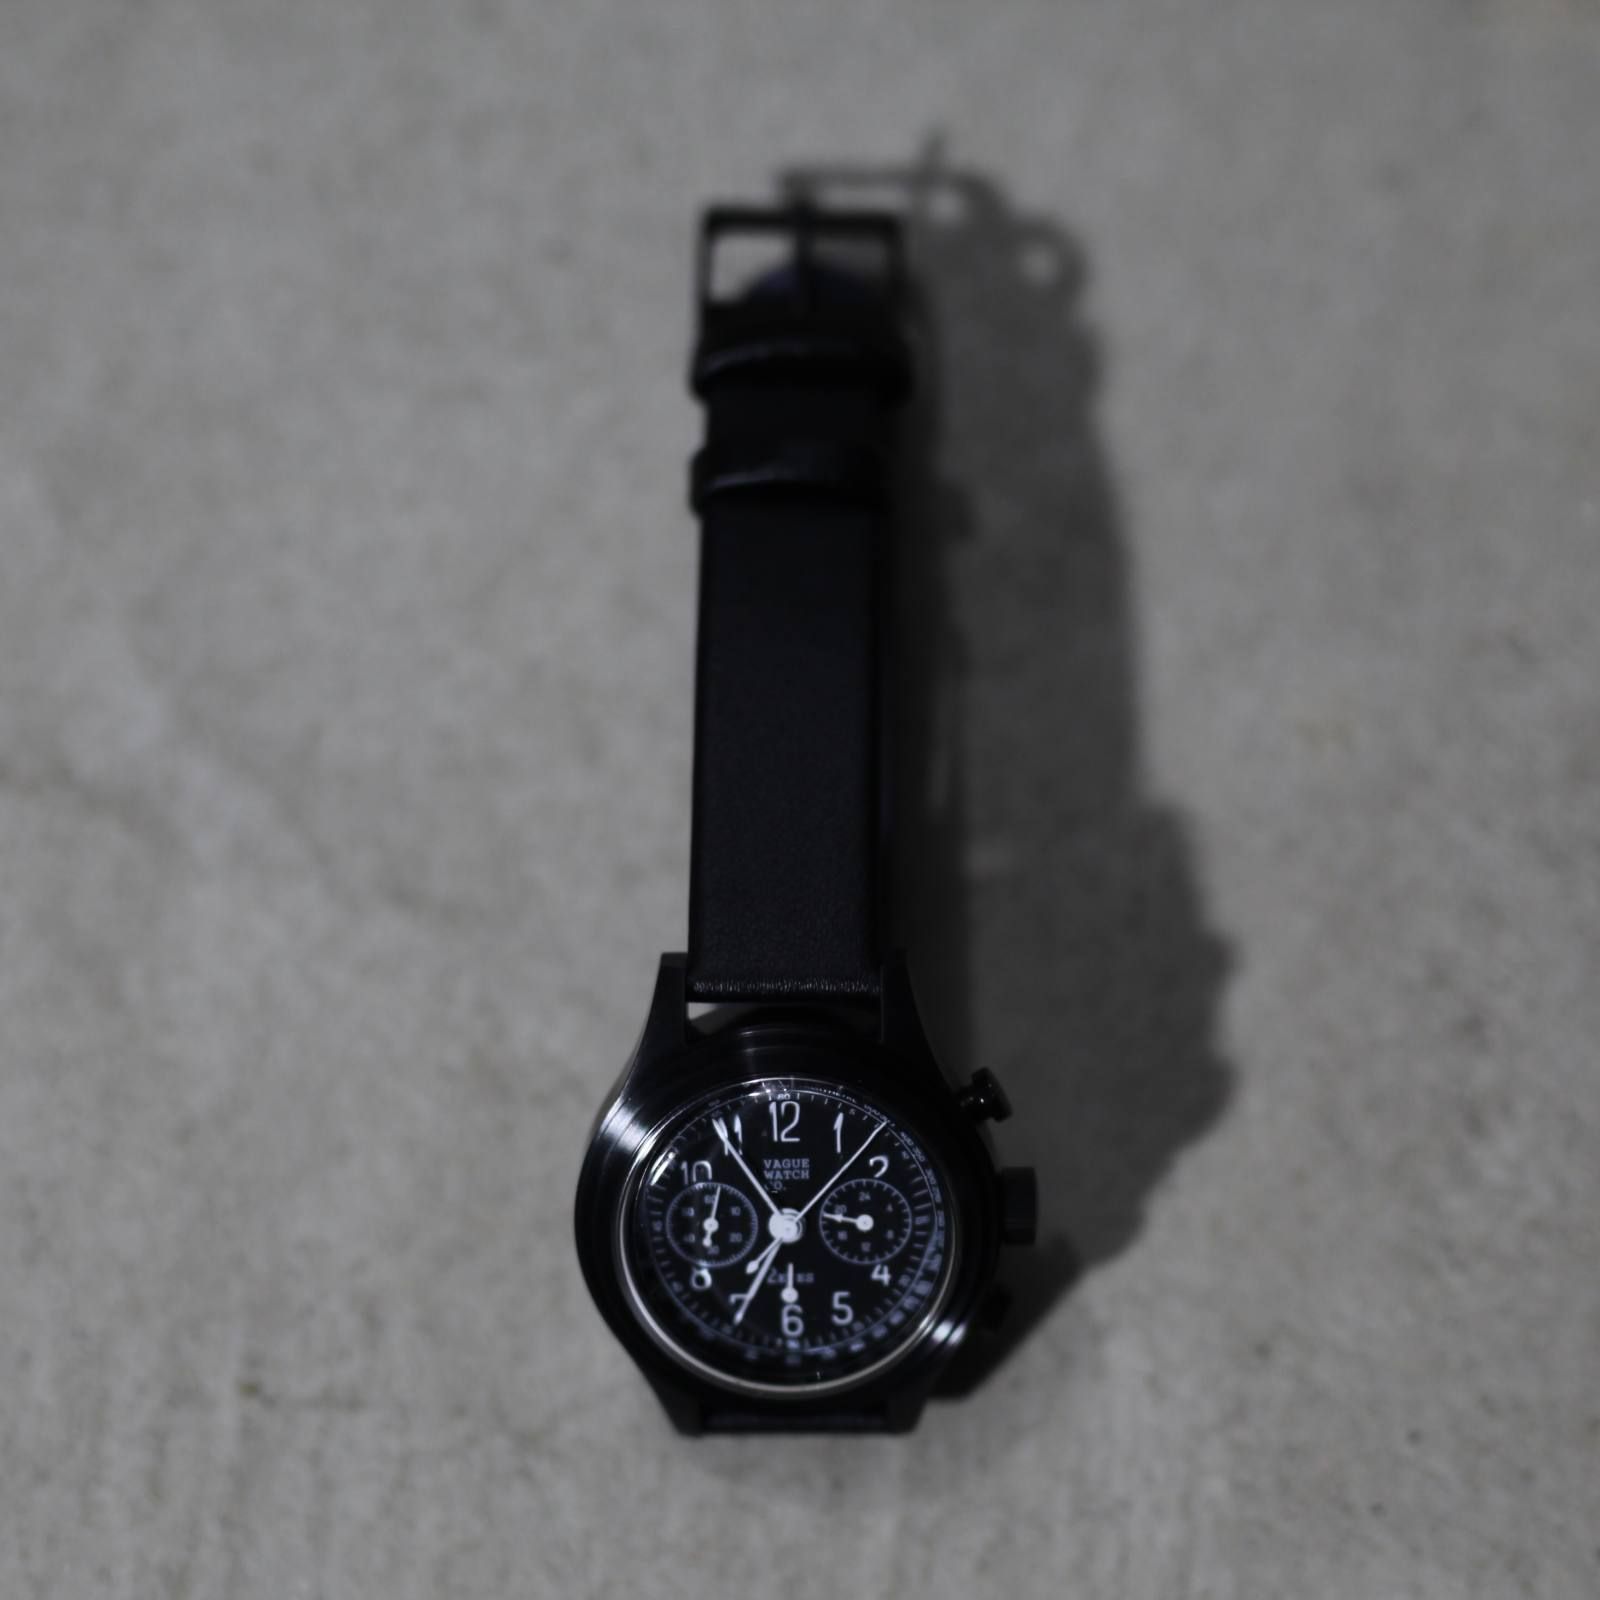 VAGUE WATCH CO. - 【お取り寄せ注文可能】2EYES | ACRMTSM ONLINE STORE